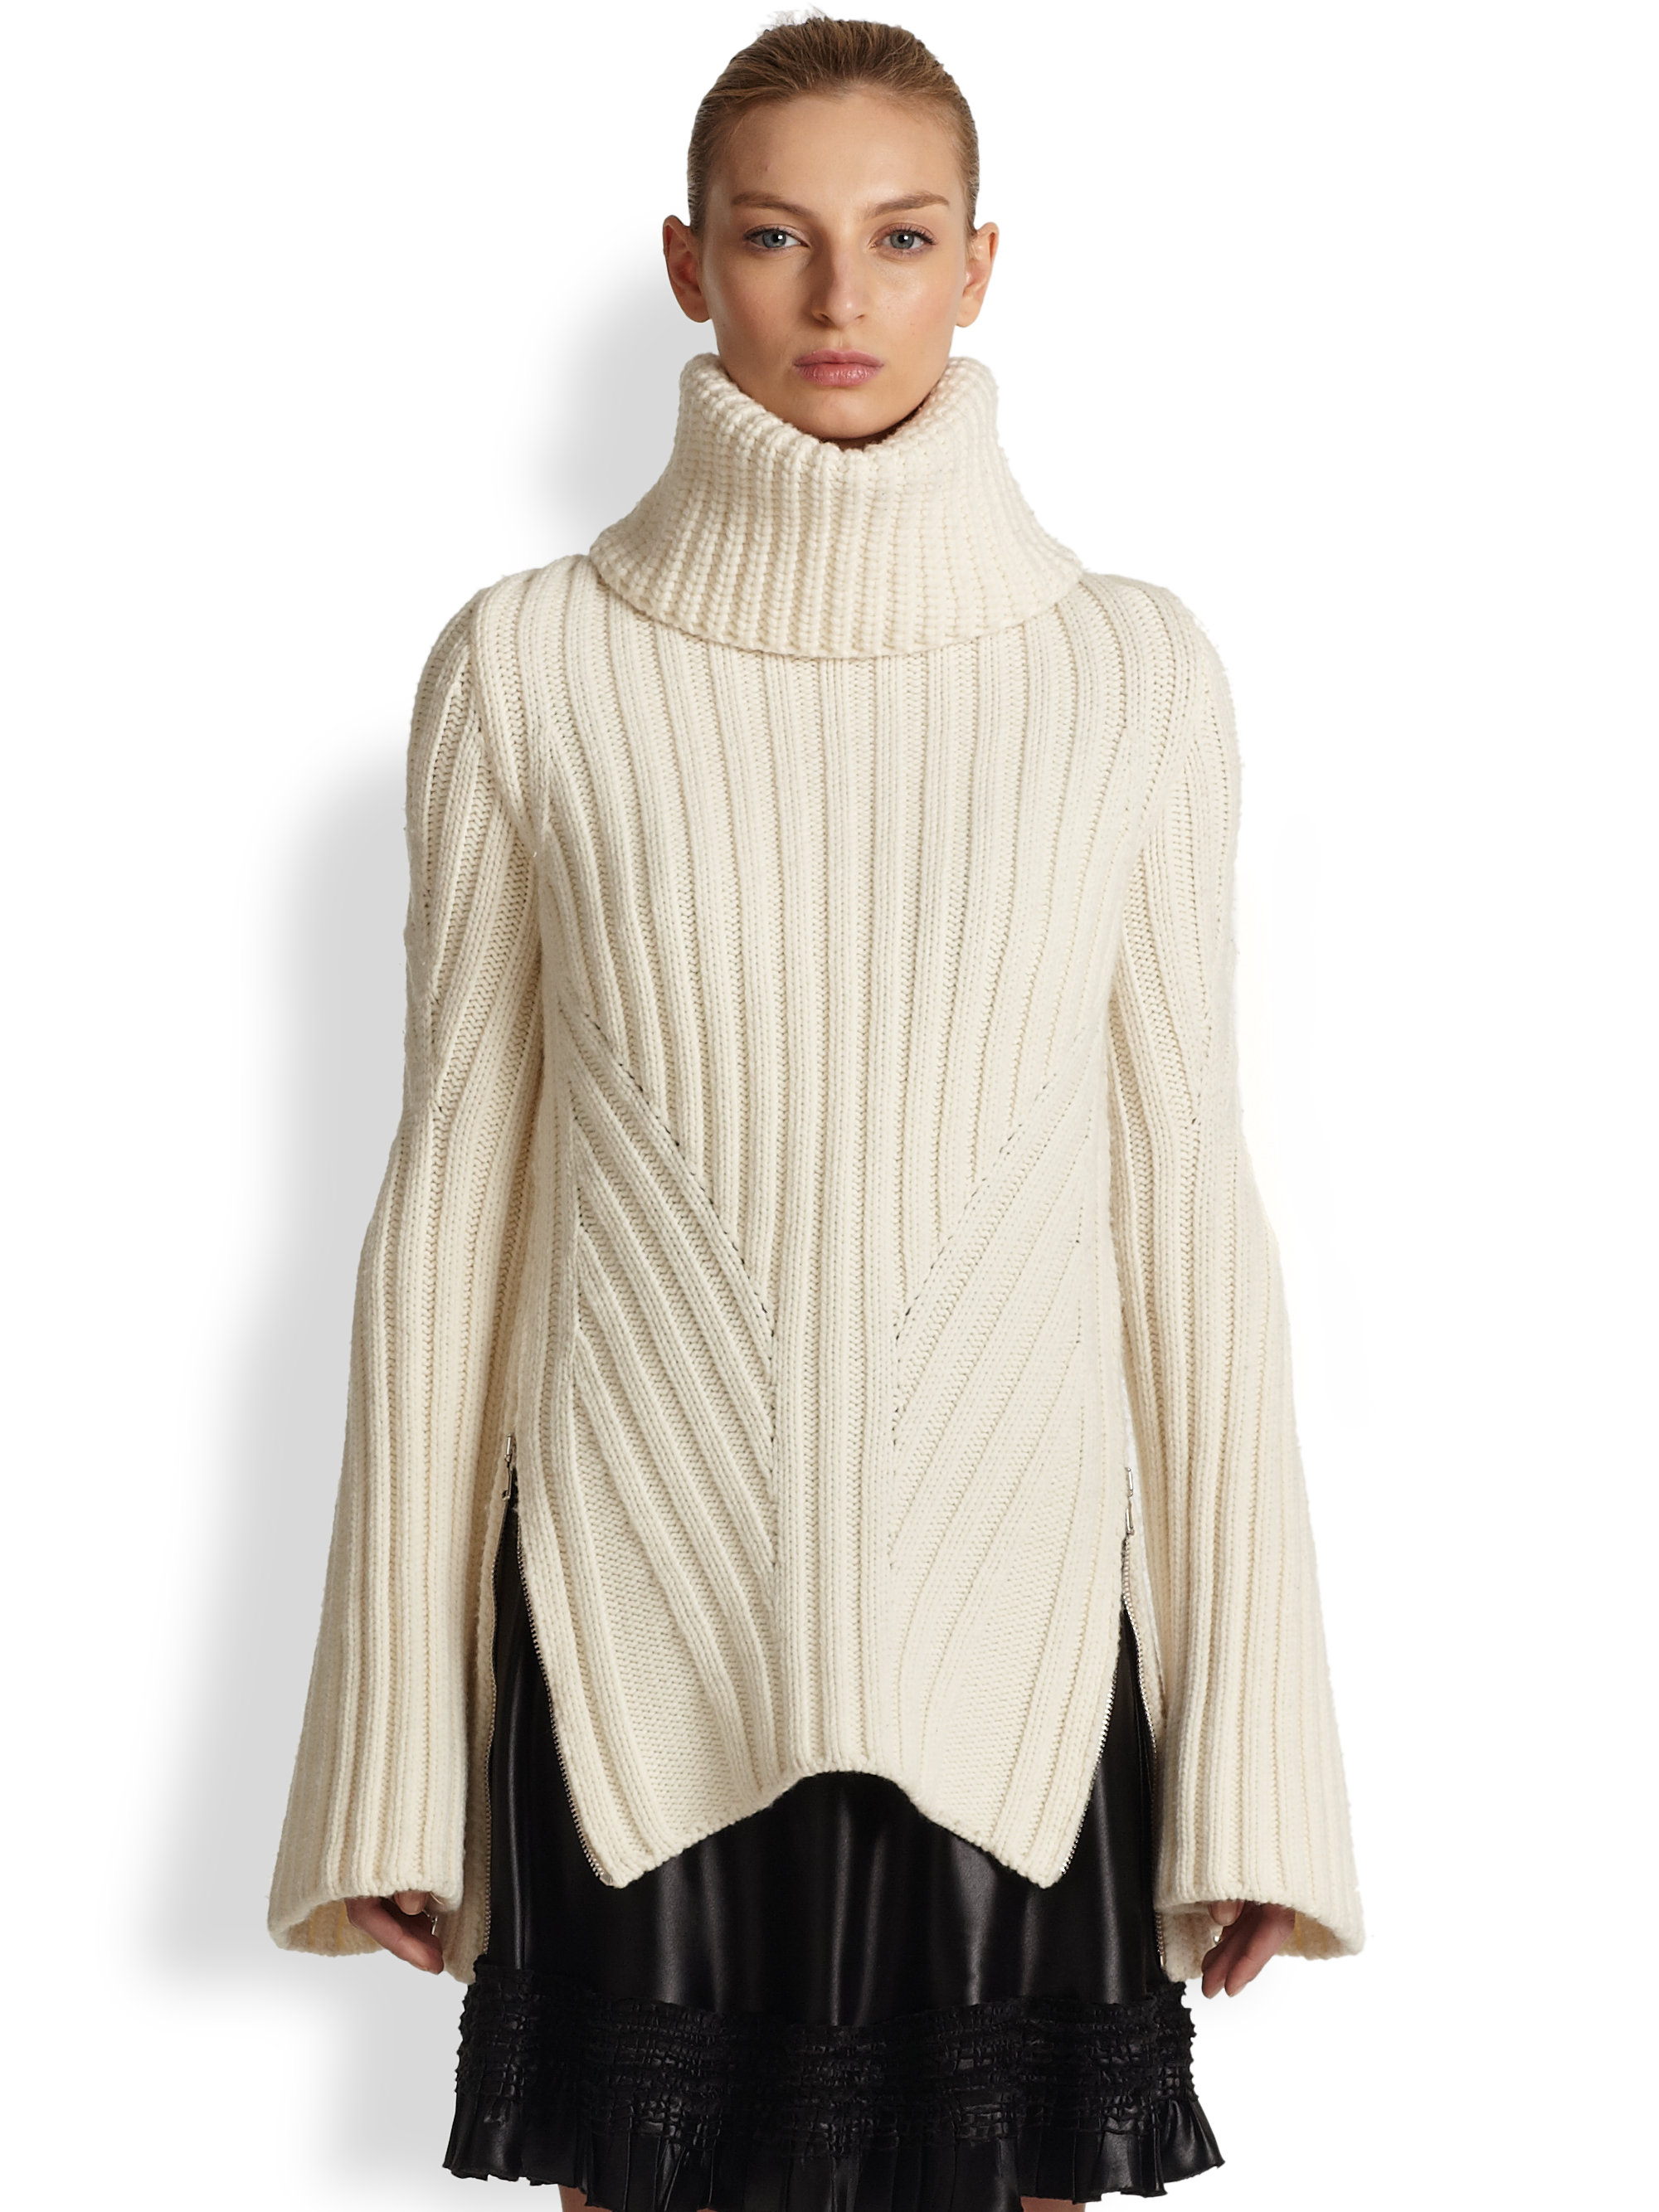 Lyst - Alexander Mcqueen Funnel Neck Wool & Cashmere Sweater in Natural